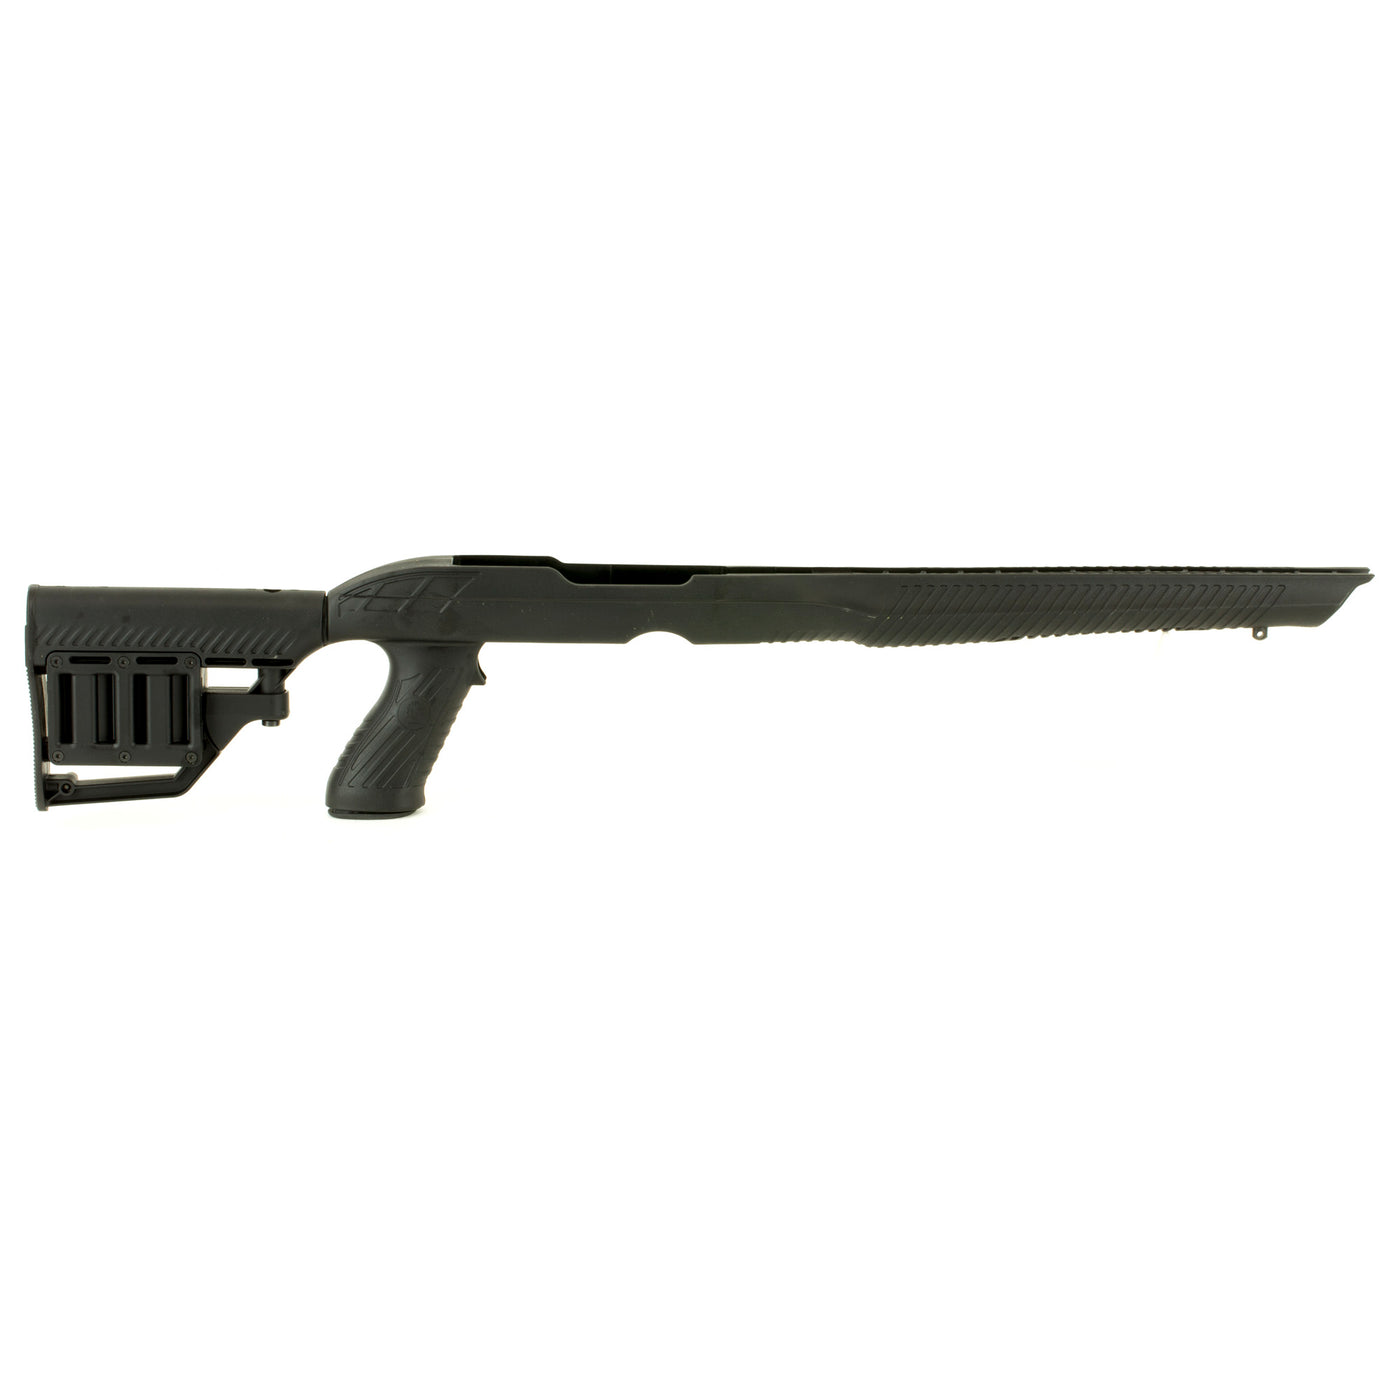 Adtac M4 Stock Ruger 10/22 - Tactical Black Synthetic